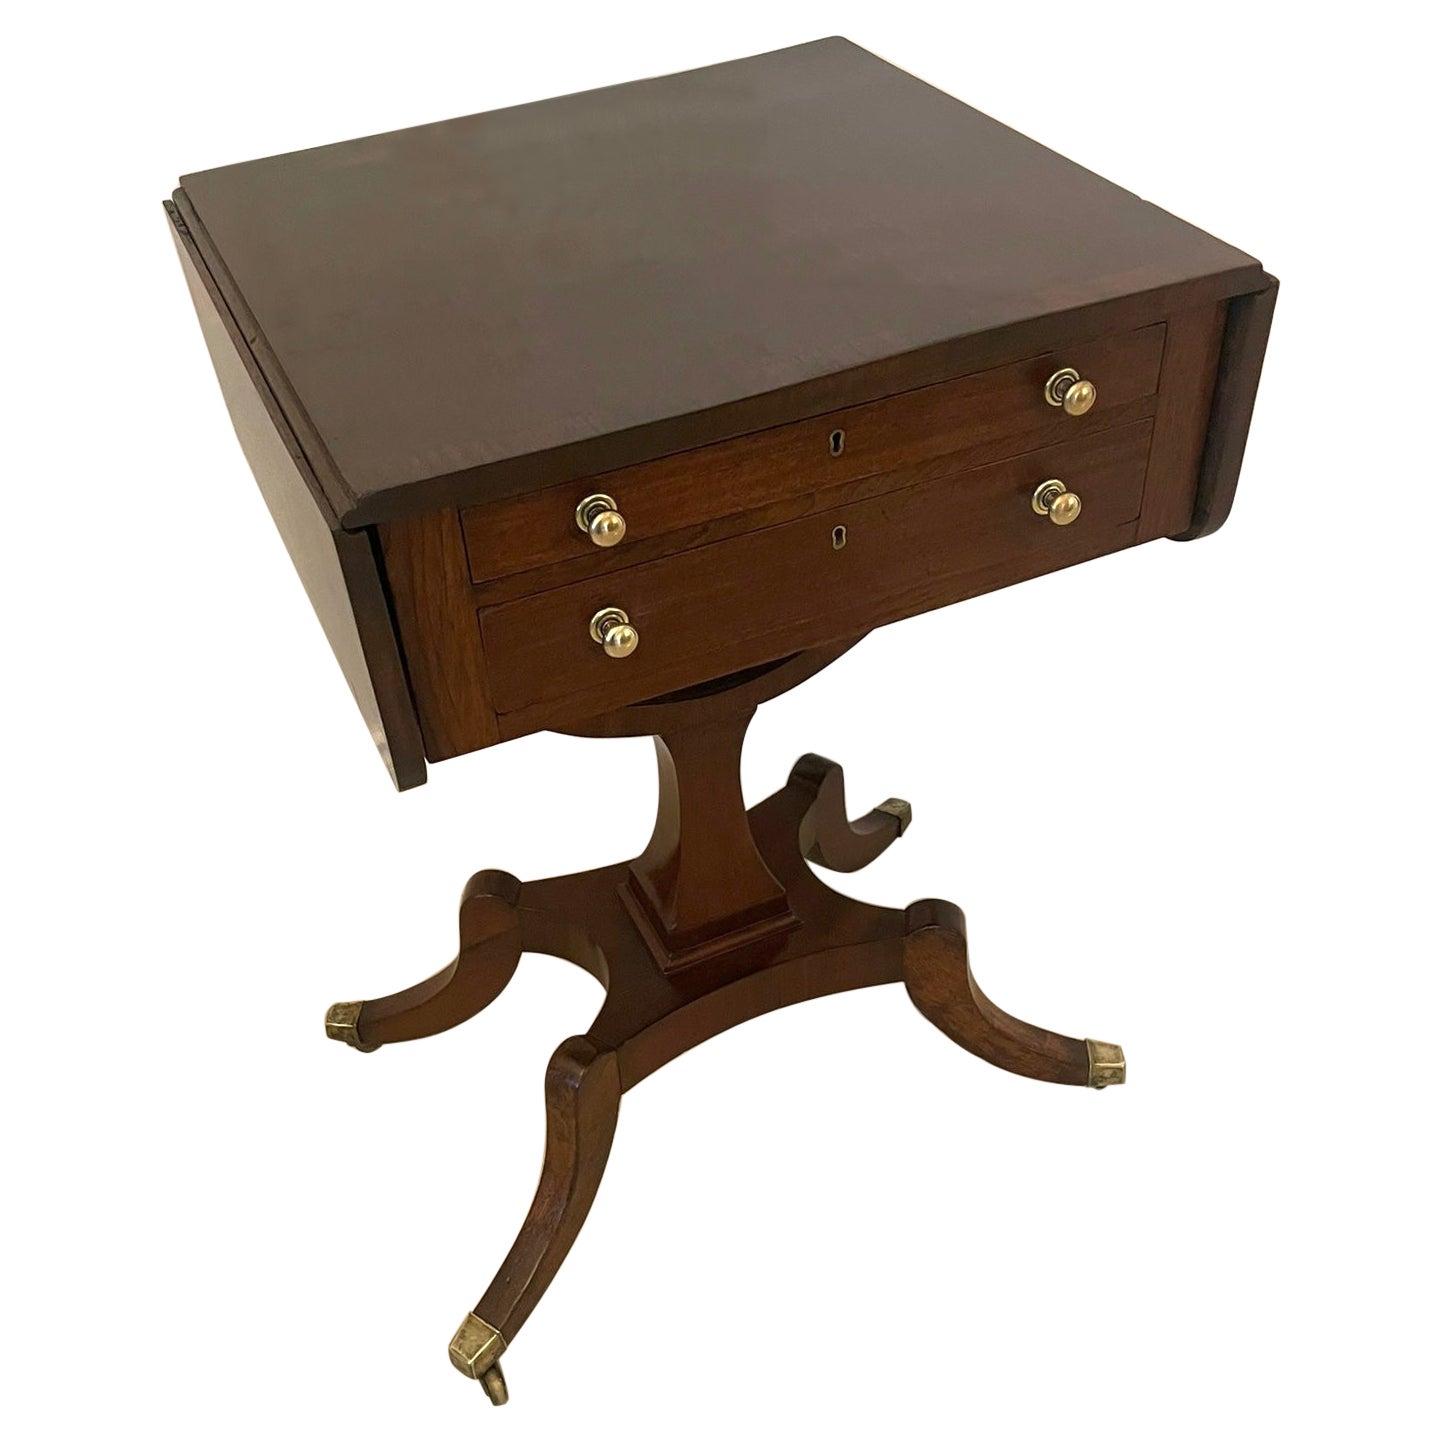 Superb Quality Antique Regency Freestanding Mahogany Sewing/Side Table For Sale